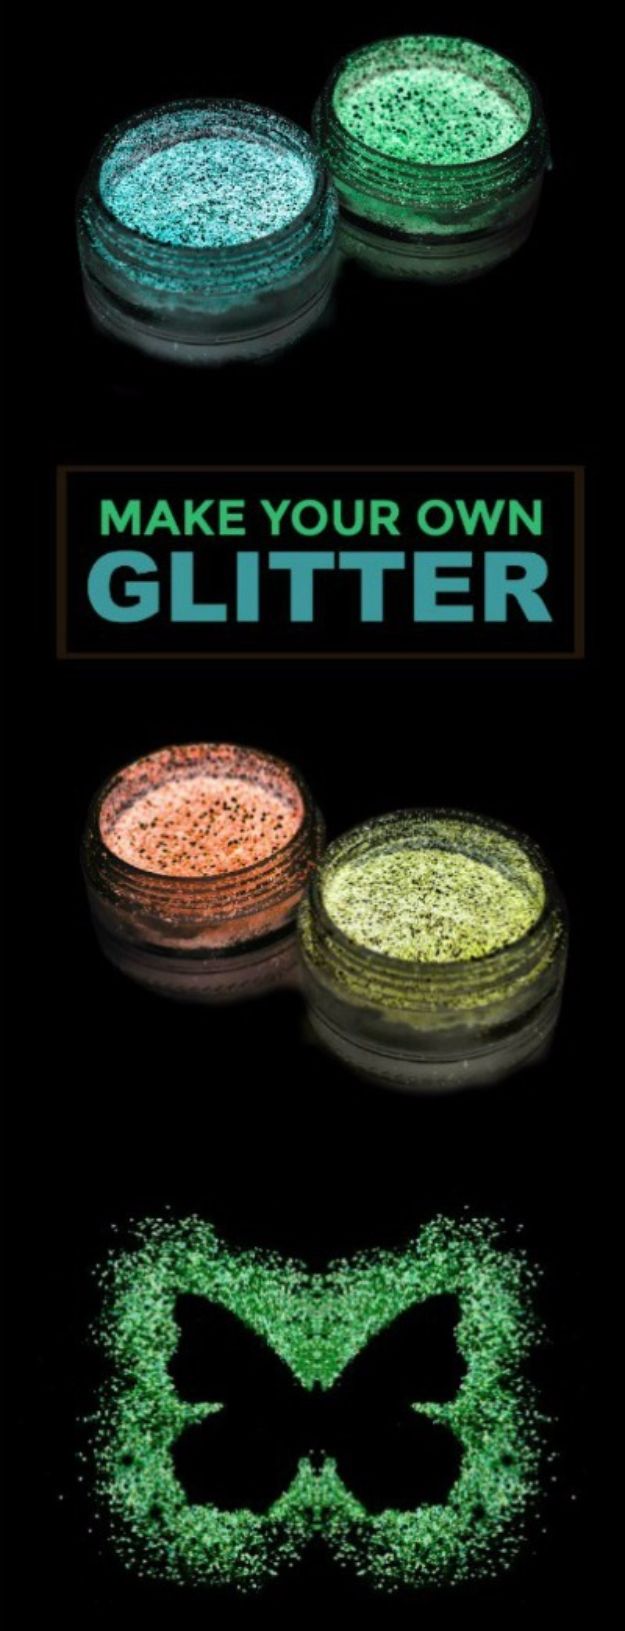 DIY Ideas WIth Glitter - Glow-in-the-Dark Glitter - Easy Crafts and Projects for Decoration, Gifts, and Bedroom Decor - How To Make Ombre, Mod Podge and Glitter Mason Jar Gift Ideas For Teens - Easy Clothes and Makeup Crafts For Teenagers #diyideas #glitter #crafts